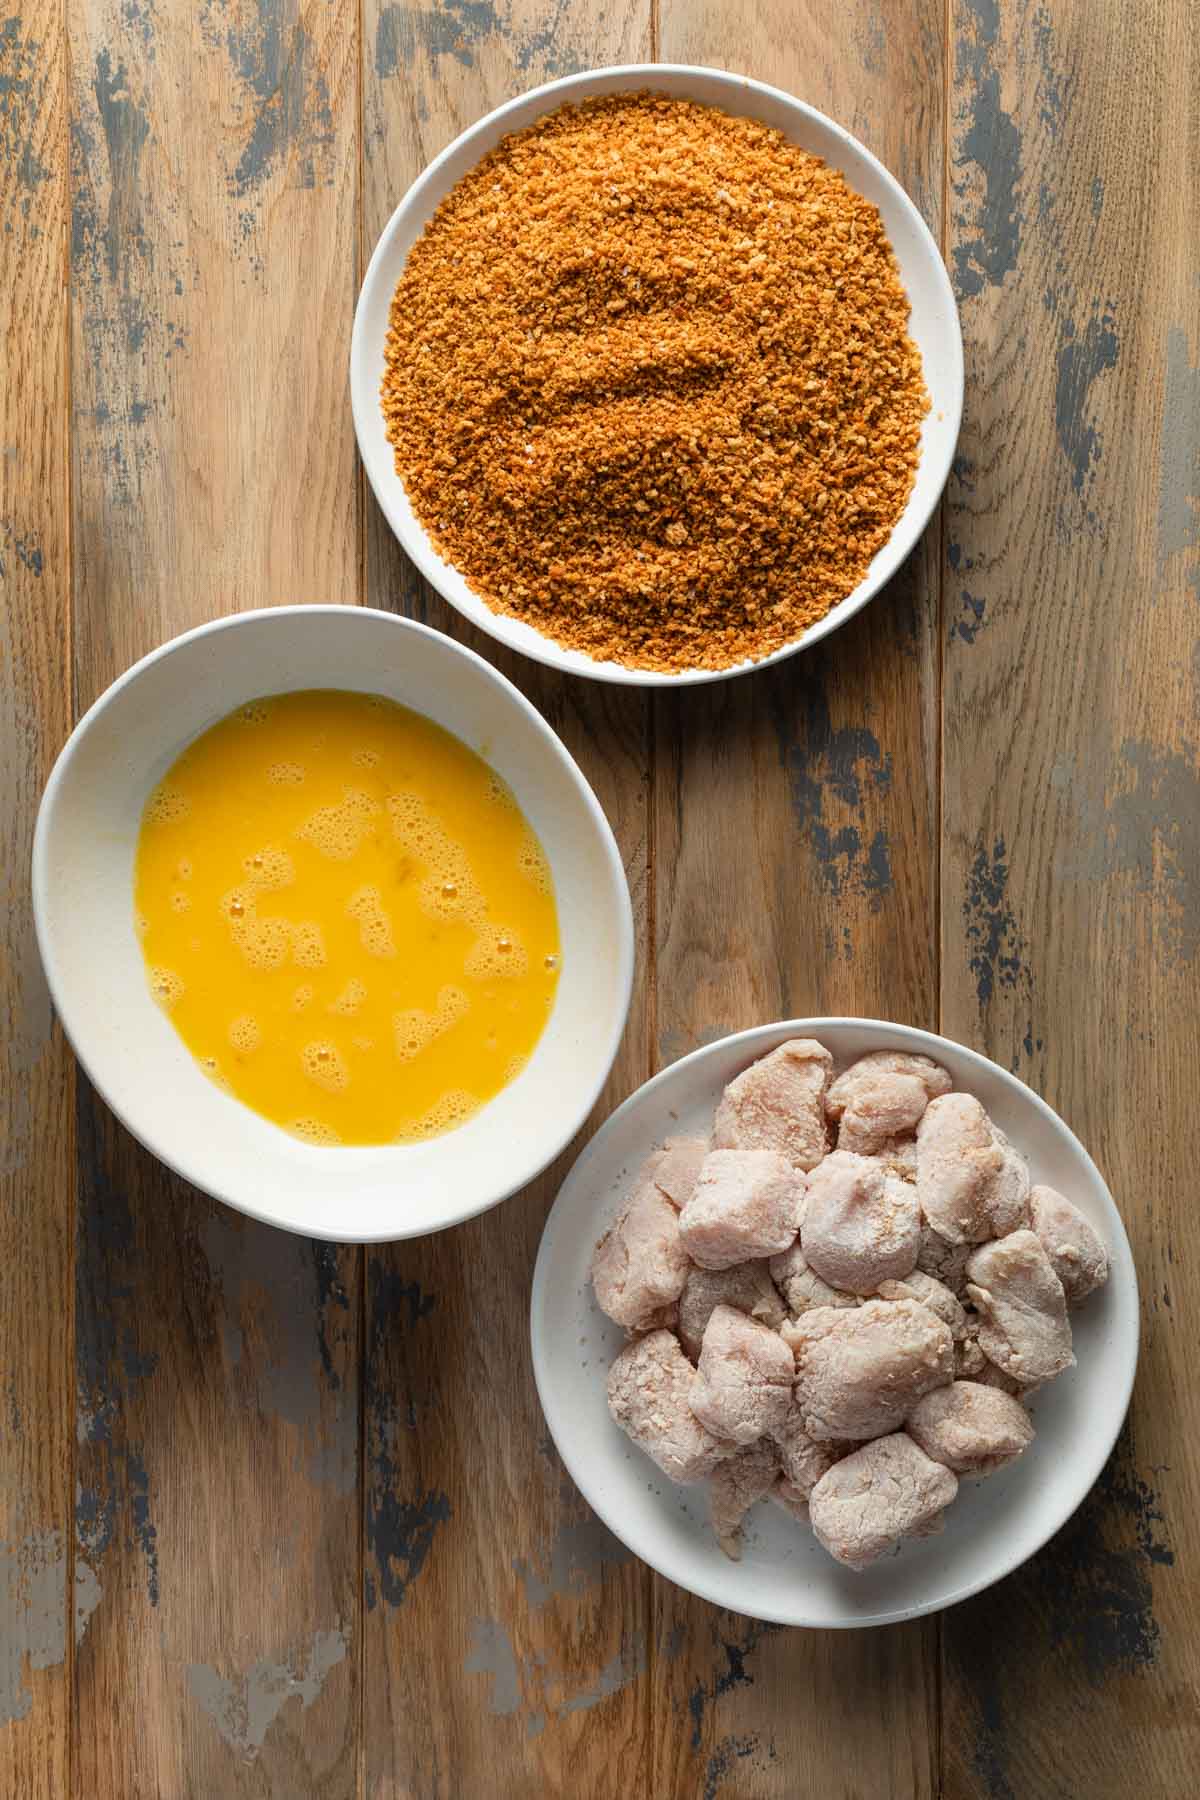 Floured chicken, whisked eggs and panko seasoning arranged in separate dishes.